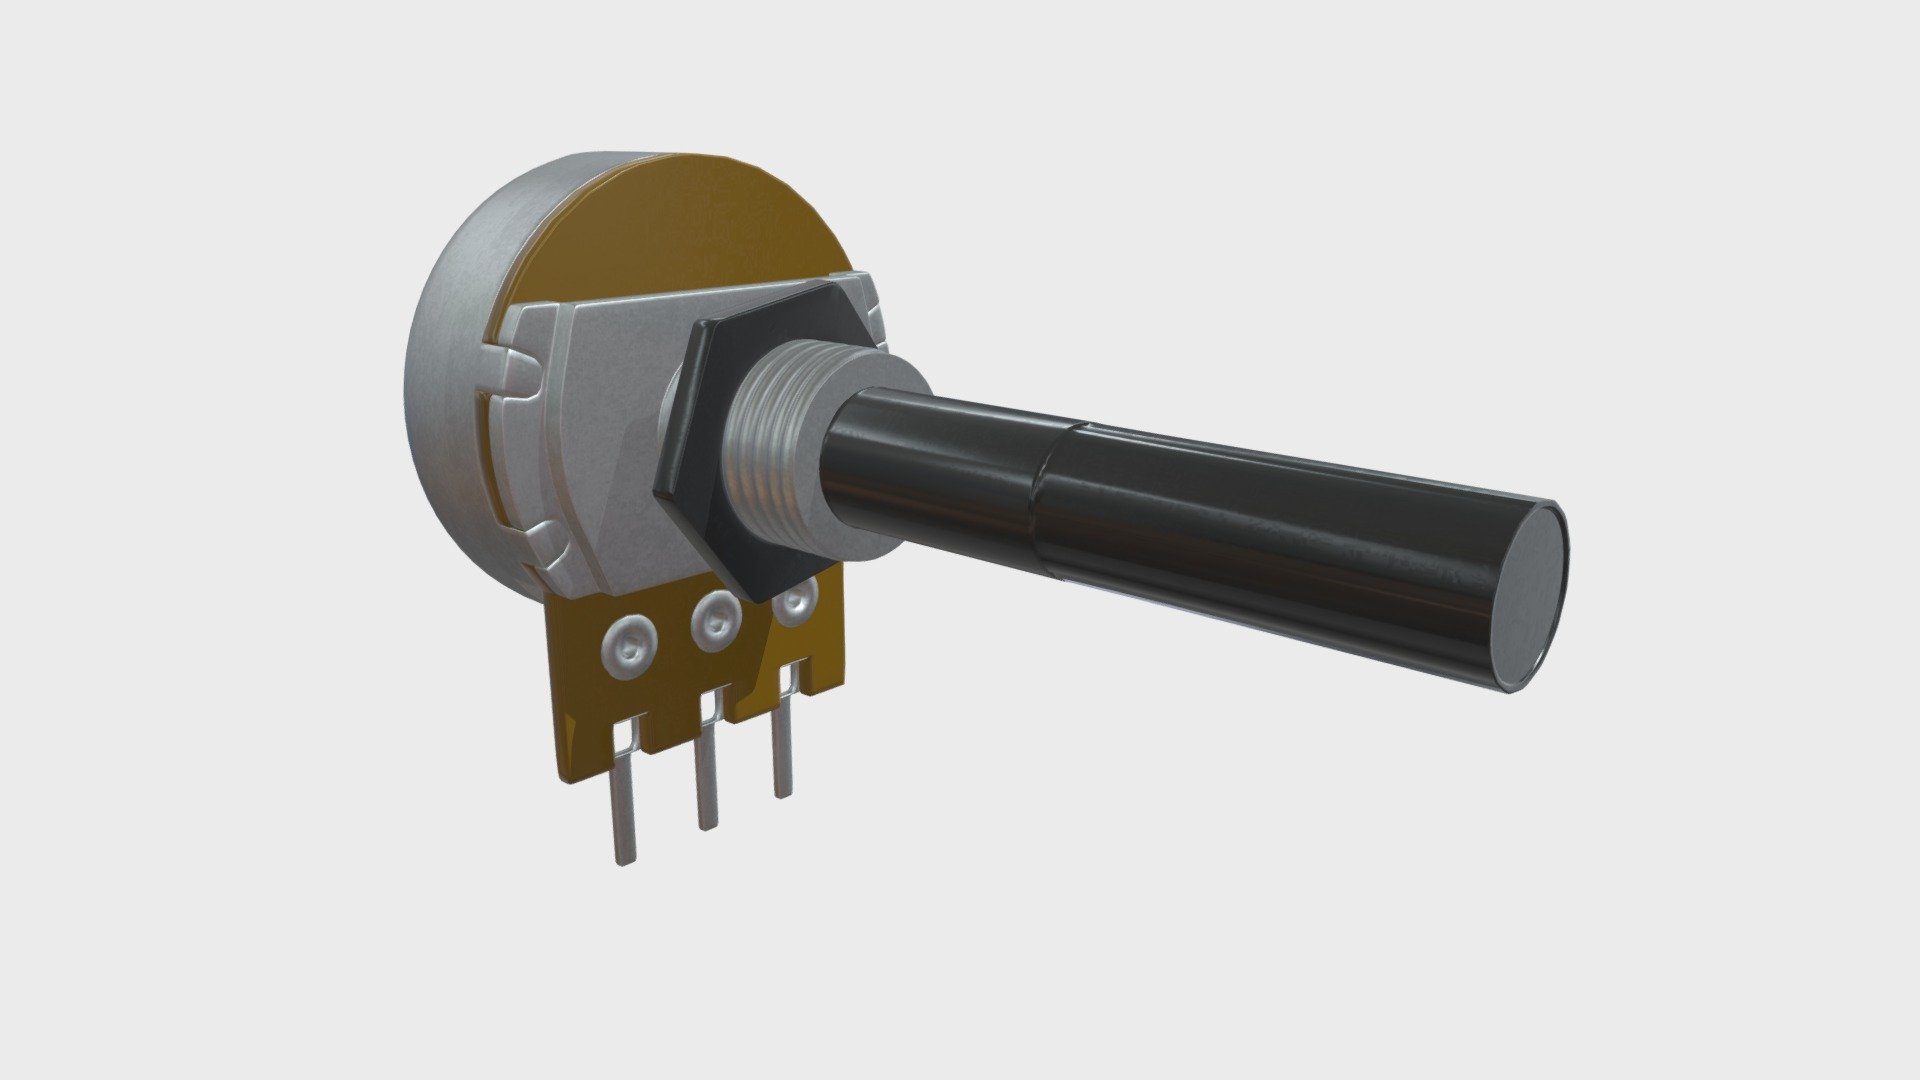 === The following description refers to the additional ZIP package provided with this model ===

Single turn potentiometer (varible resistor, trimmer) 3D Model. Production-ready 3D Model, with PBR materials, textures, non overlapping UV Layout map provided in the package.

Quads only geometries (no tris/ngons).

Formats included: FBX, OBJ; scenes: BLEND (with Cycles / Eevee PBR Materials and Textures); other: png with Alpha.

1 Object (mesh), 1 PBR Material, UV unwrapped (non overlapping UV Layout map provided in the package); UV-mapped Textures.

UV Layout maps and Image Textures resolutions: 2048x2048; PBR Textures made with Substance Painter.

Polygonal, QUADS ONLY (no tris/ngons); 27692 vertices, 27651 quad faces (55302 tris).

Real world dimensions; scene scale units: cm in Blender 3.0 (that is: Metric with 0.01 scale).

Uniform scale object (scale applied in Blender 3.0) 3d model